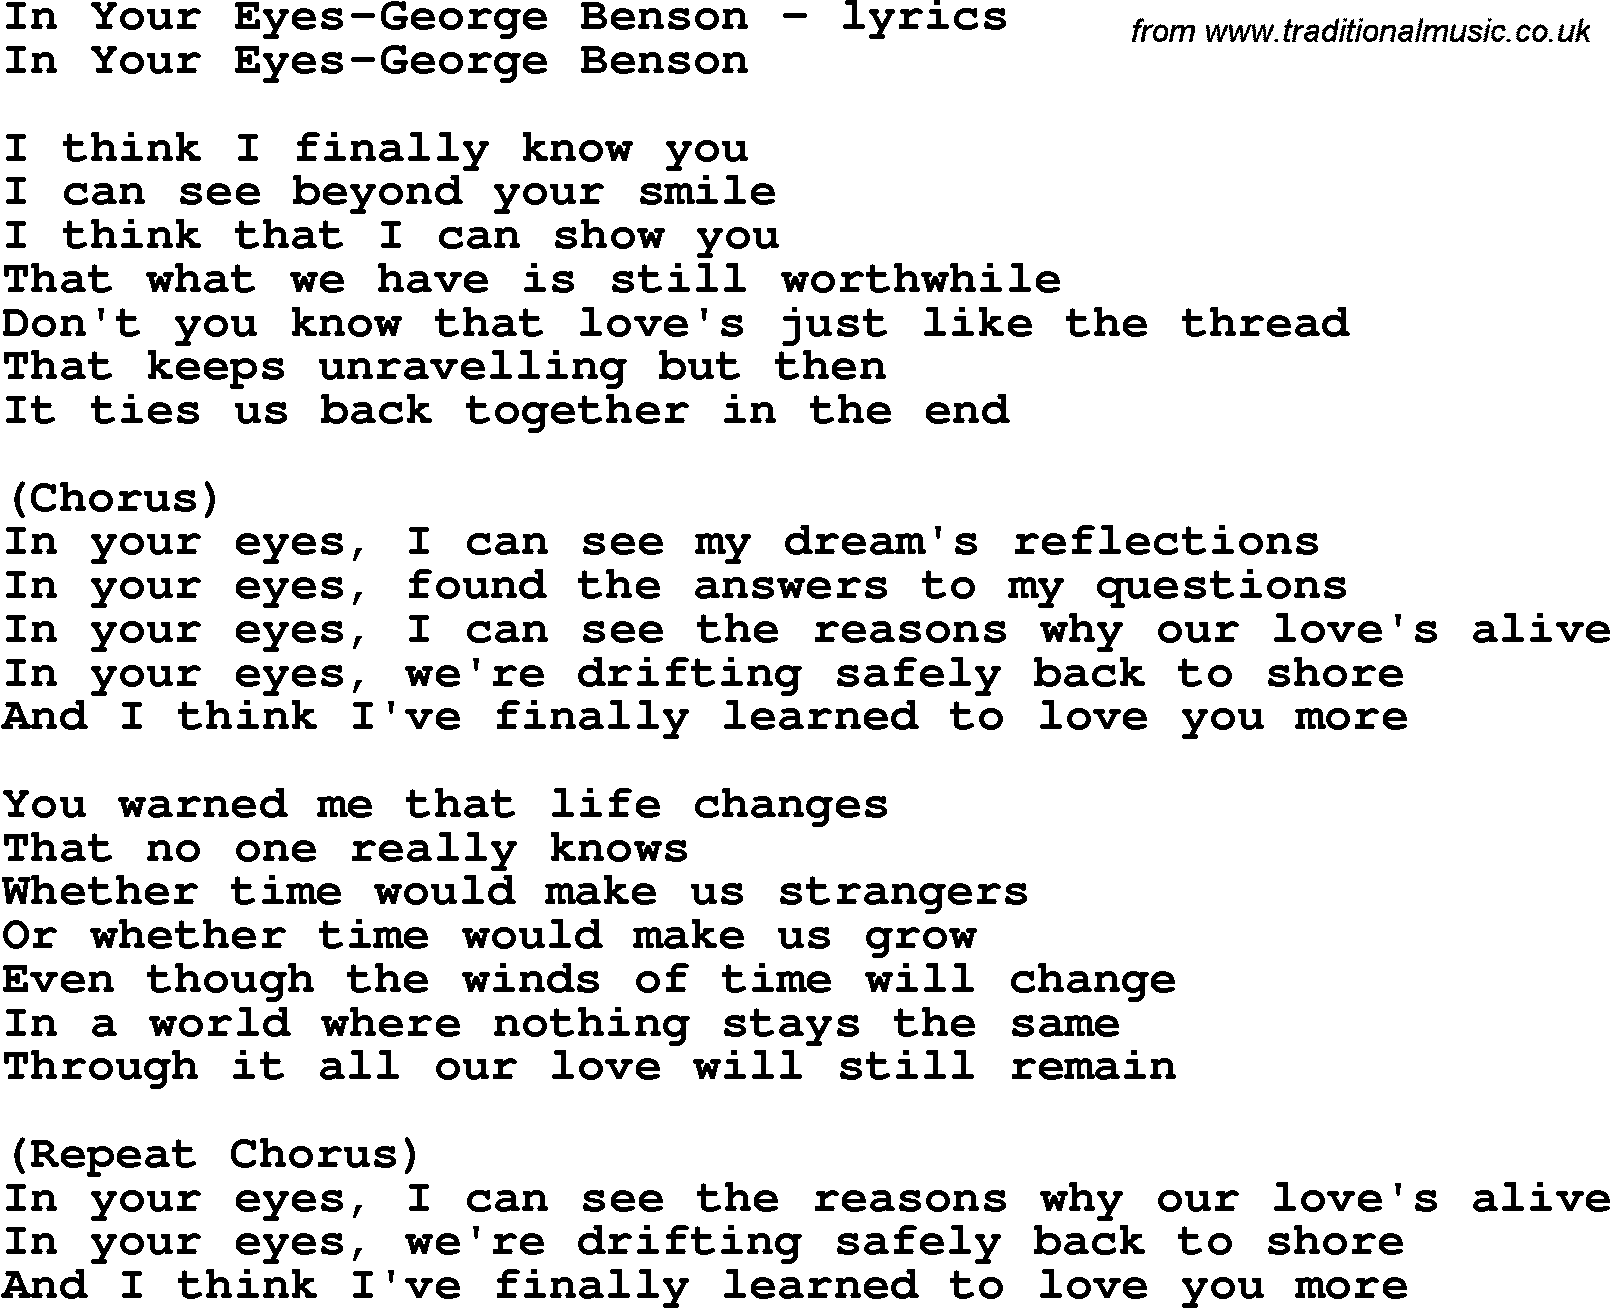 Love Song Lyrics for: In Your Eyes-George Benson